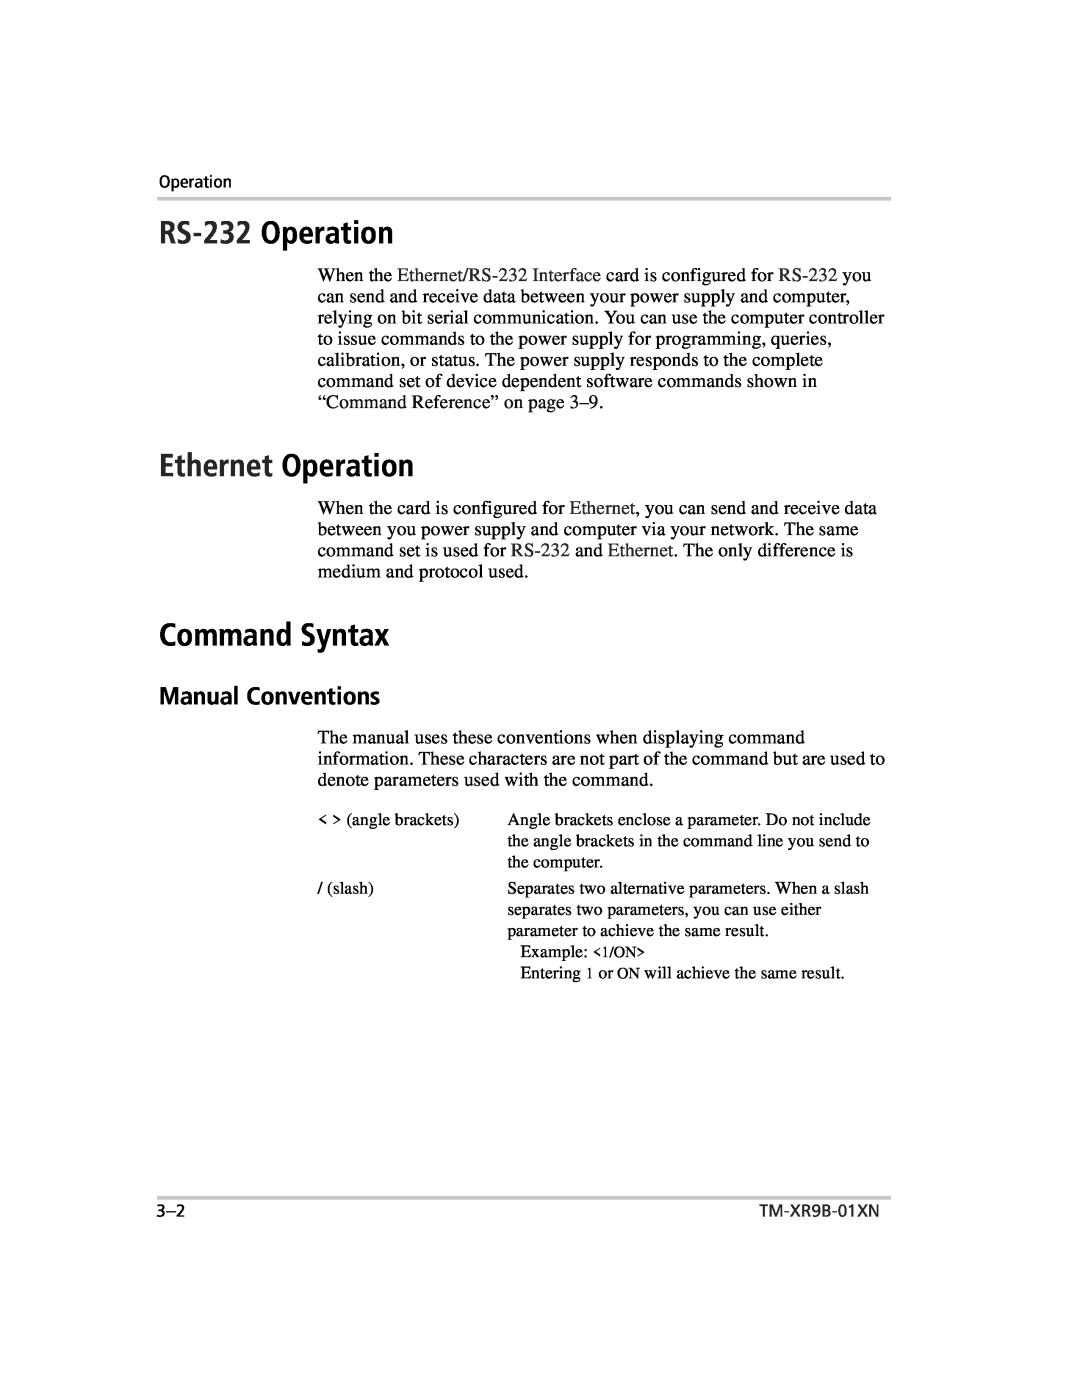 Xantrex Technology ENET-XFR3 manual RS-232 Operation, Command Syntax, Manual Conventions, Ethernet Operation 